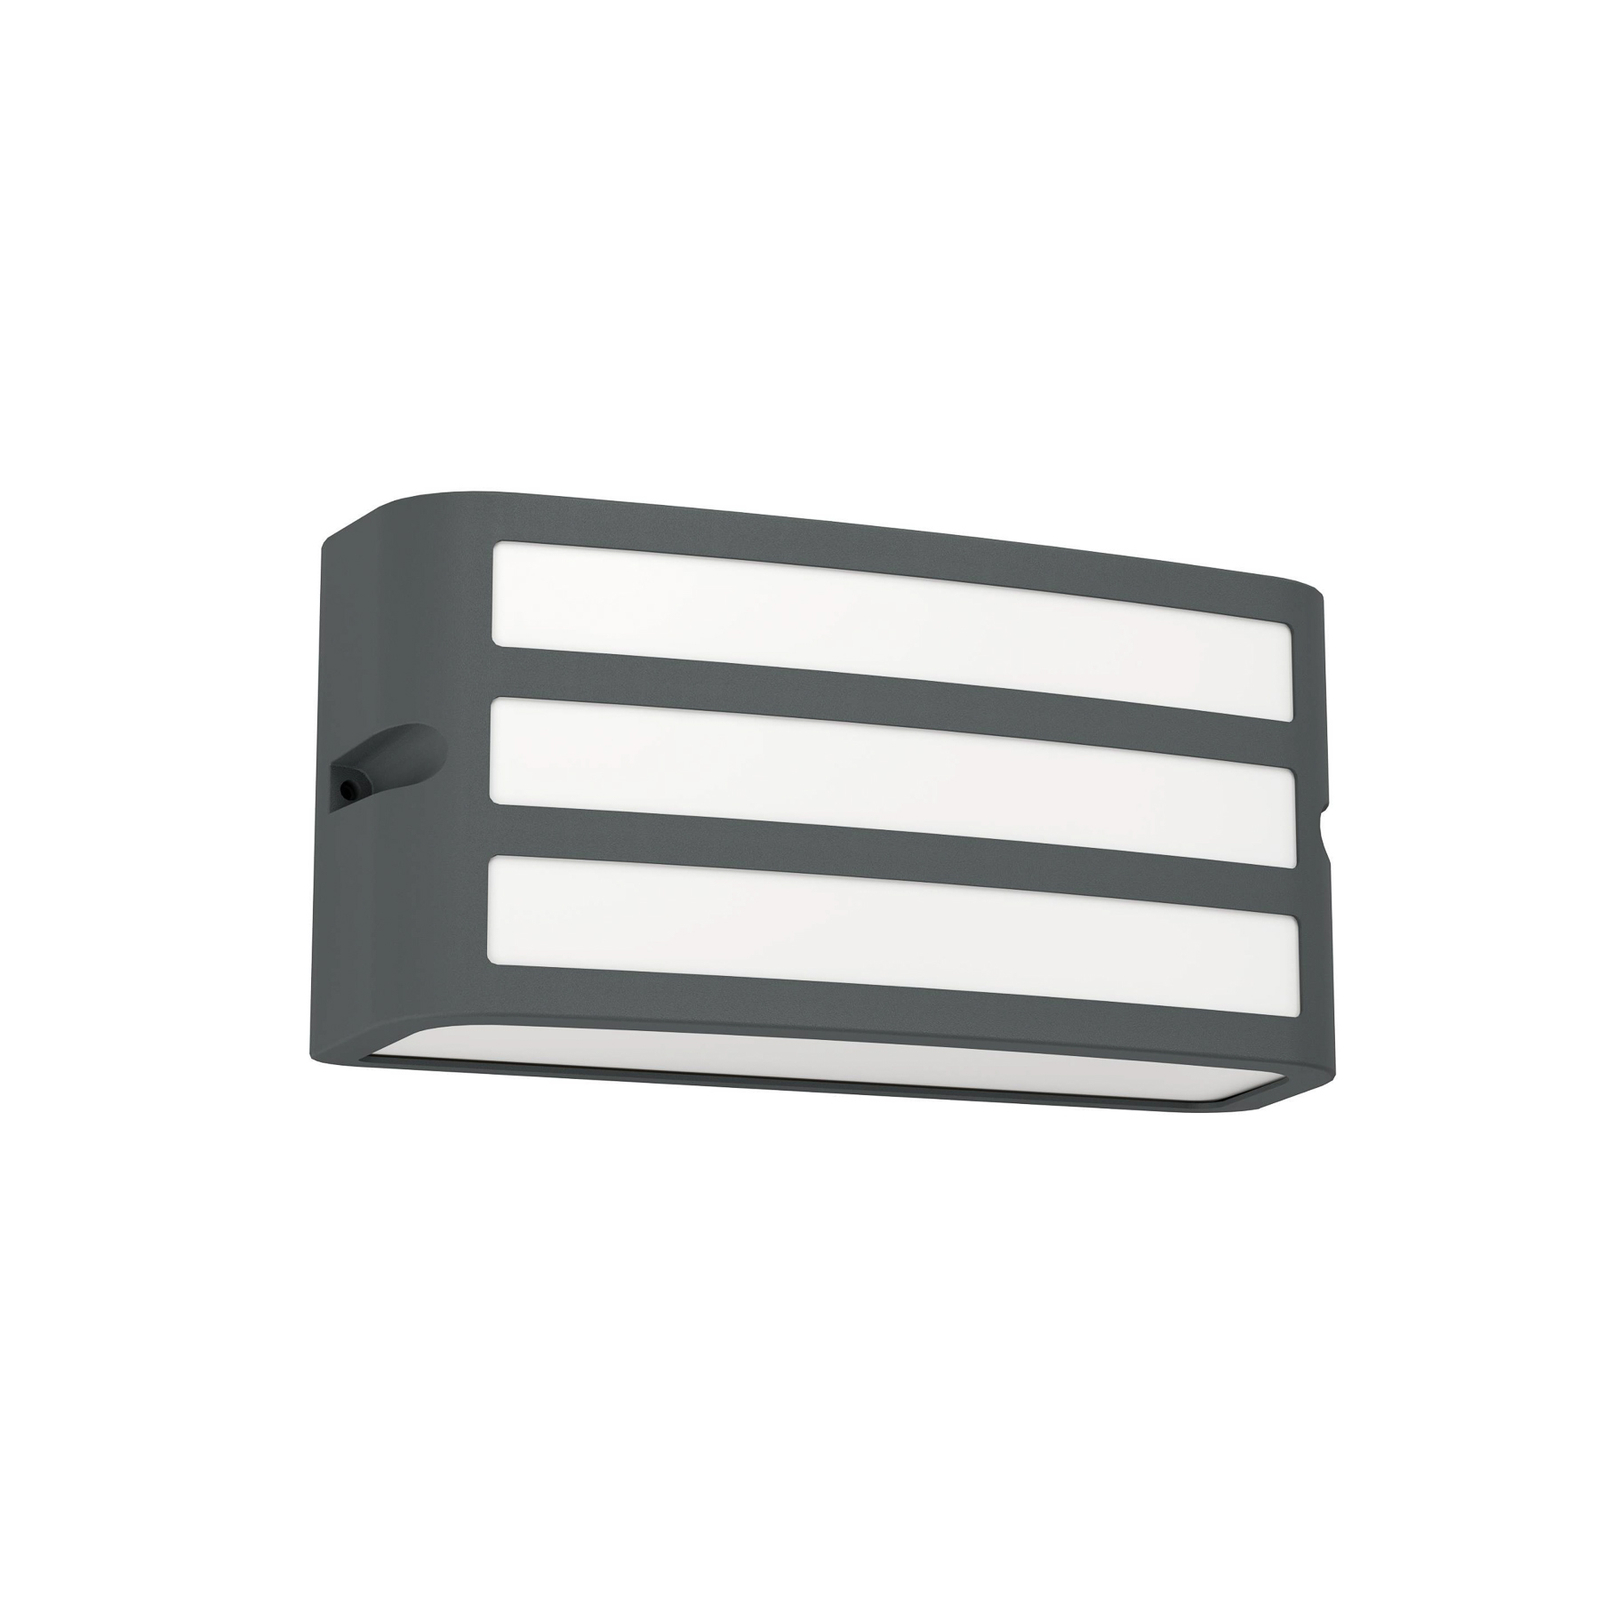 Camarda outdoor wall light with struts, anthracite